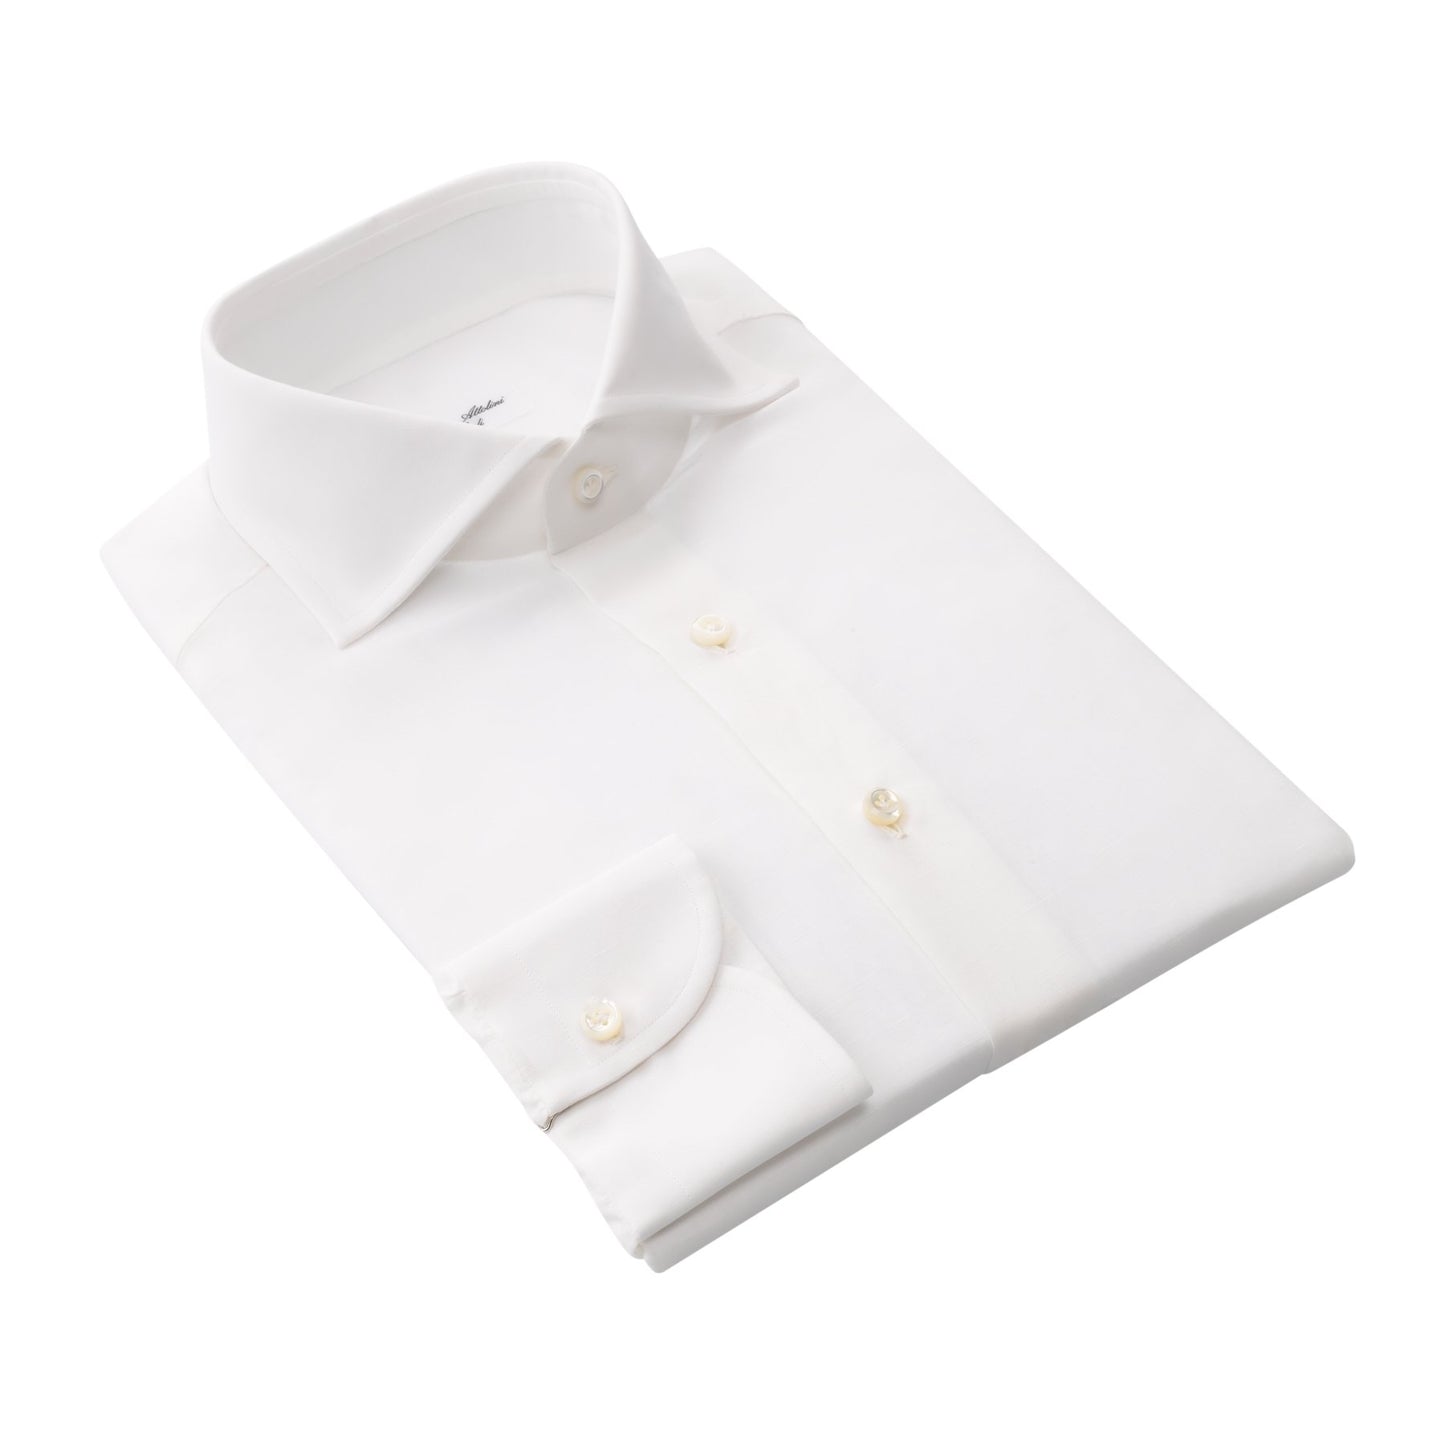 Cesare Attolini Tailored-Fit Cotton and Linen-Blend Shirt in White - SARTALE